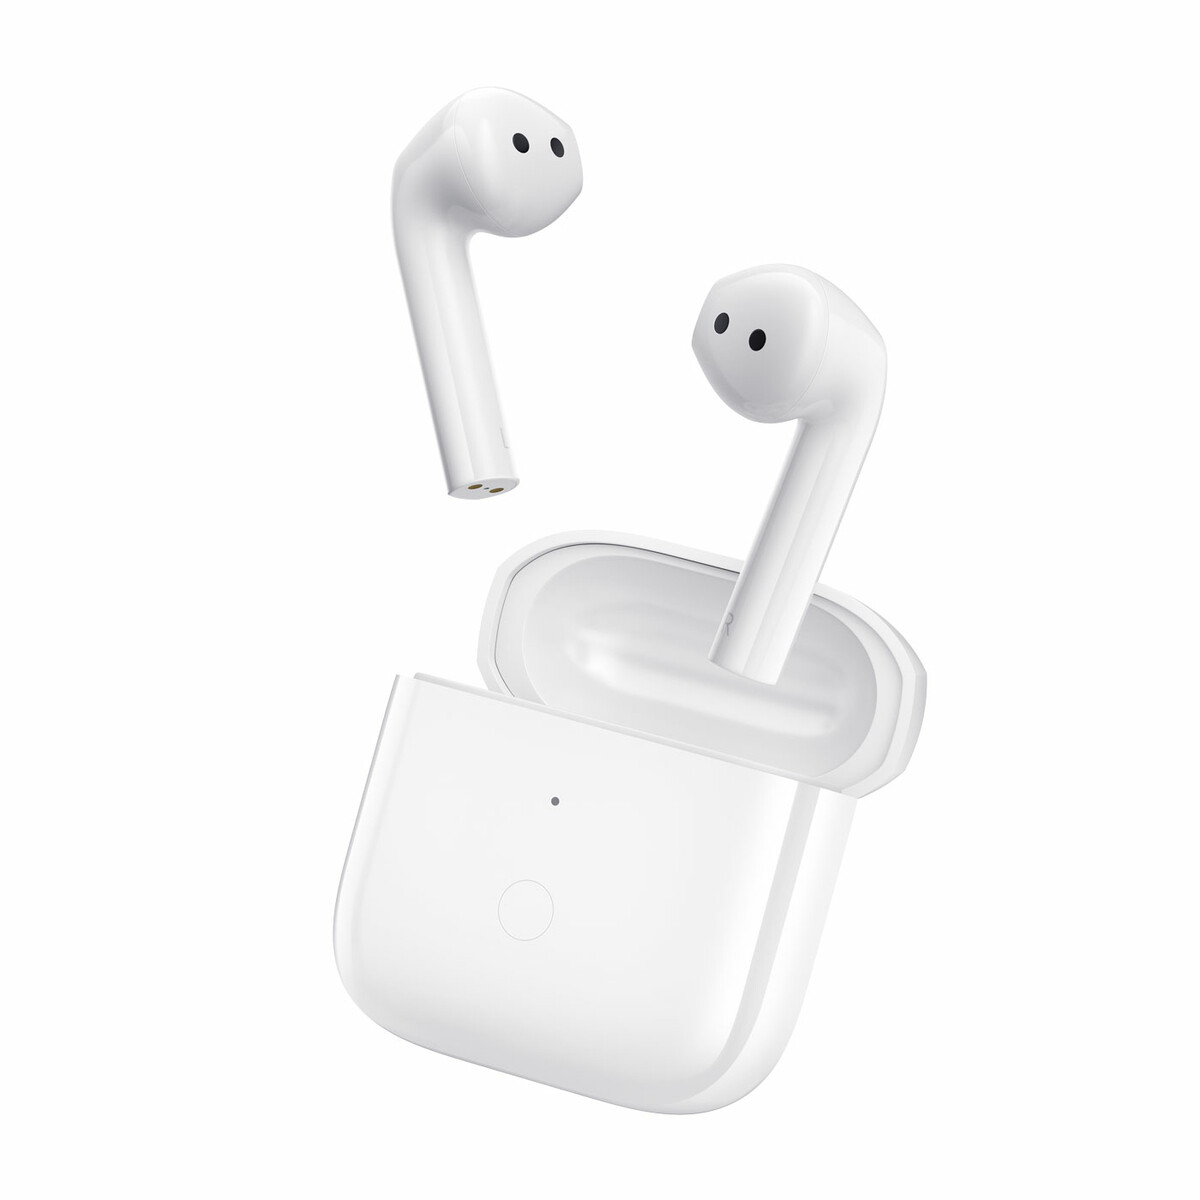 Auriculares in-ear inalambricos xiaomi redmi buds 3 bluetooth - White 